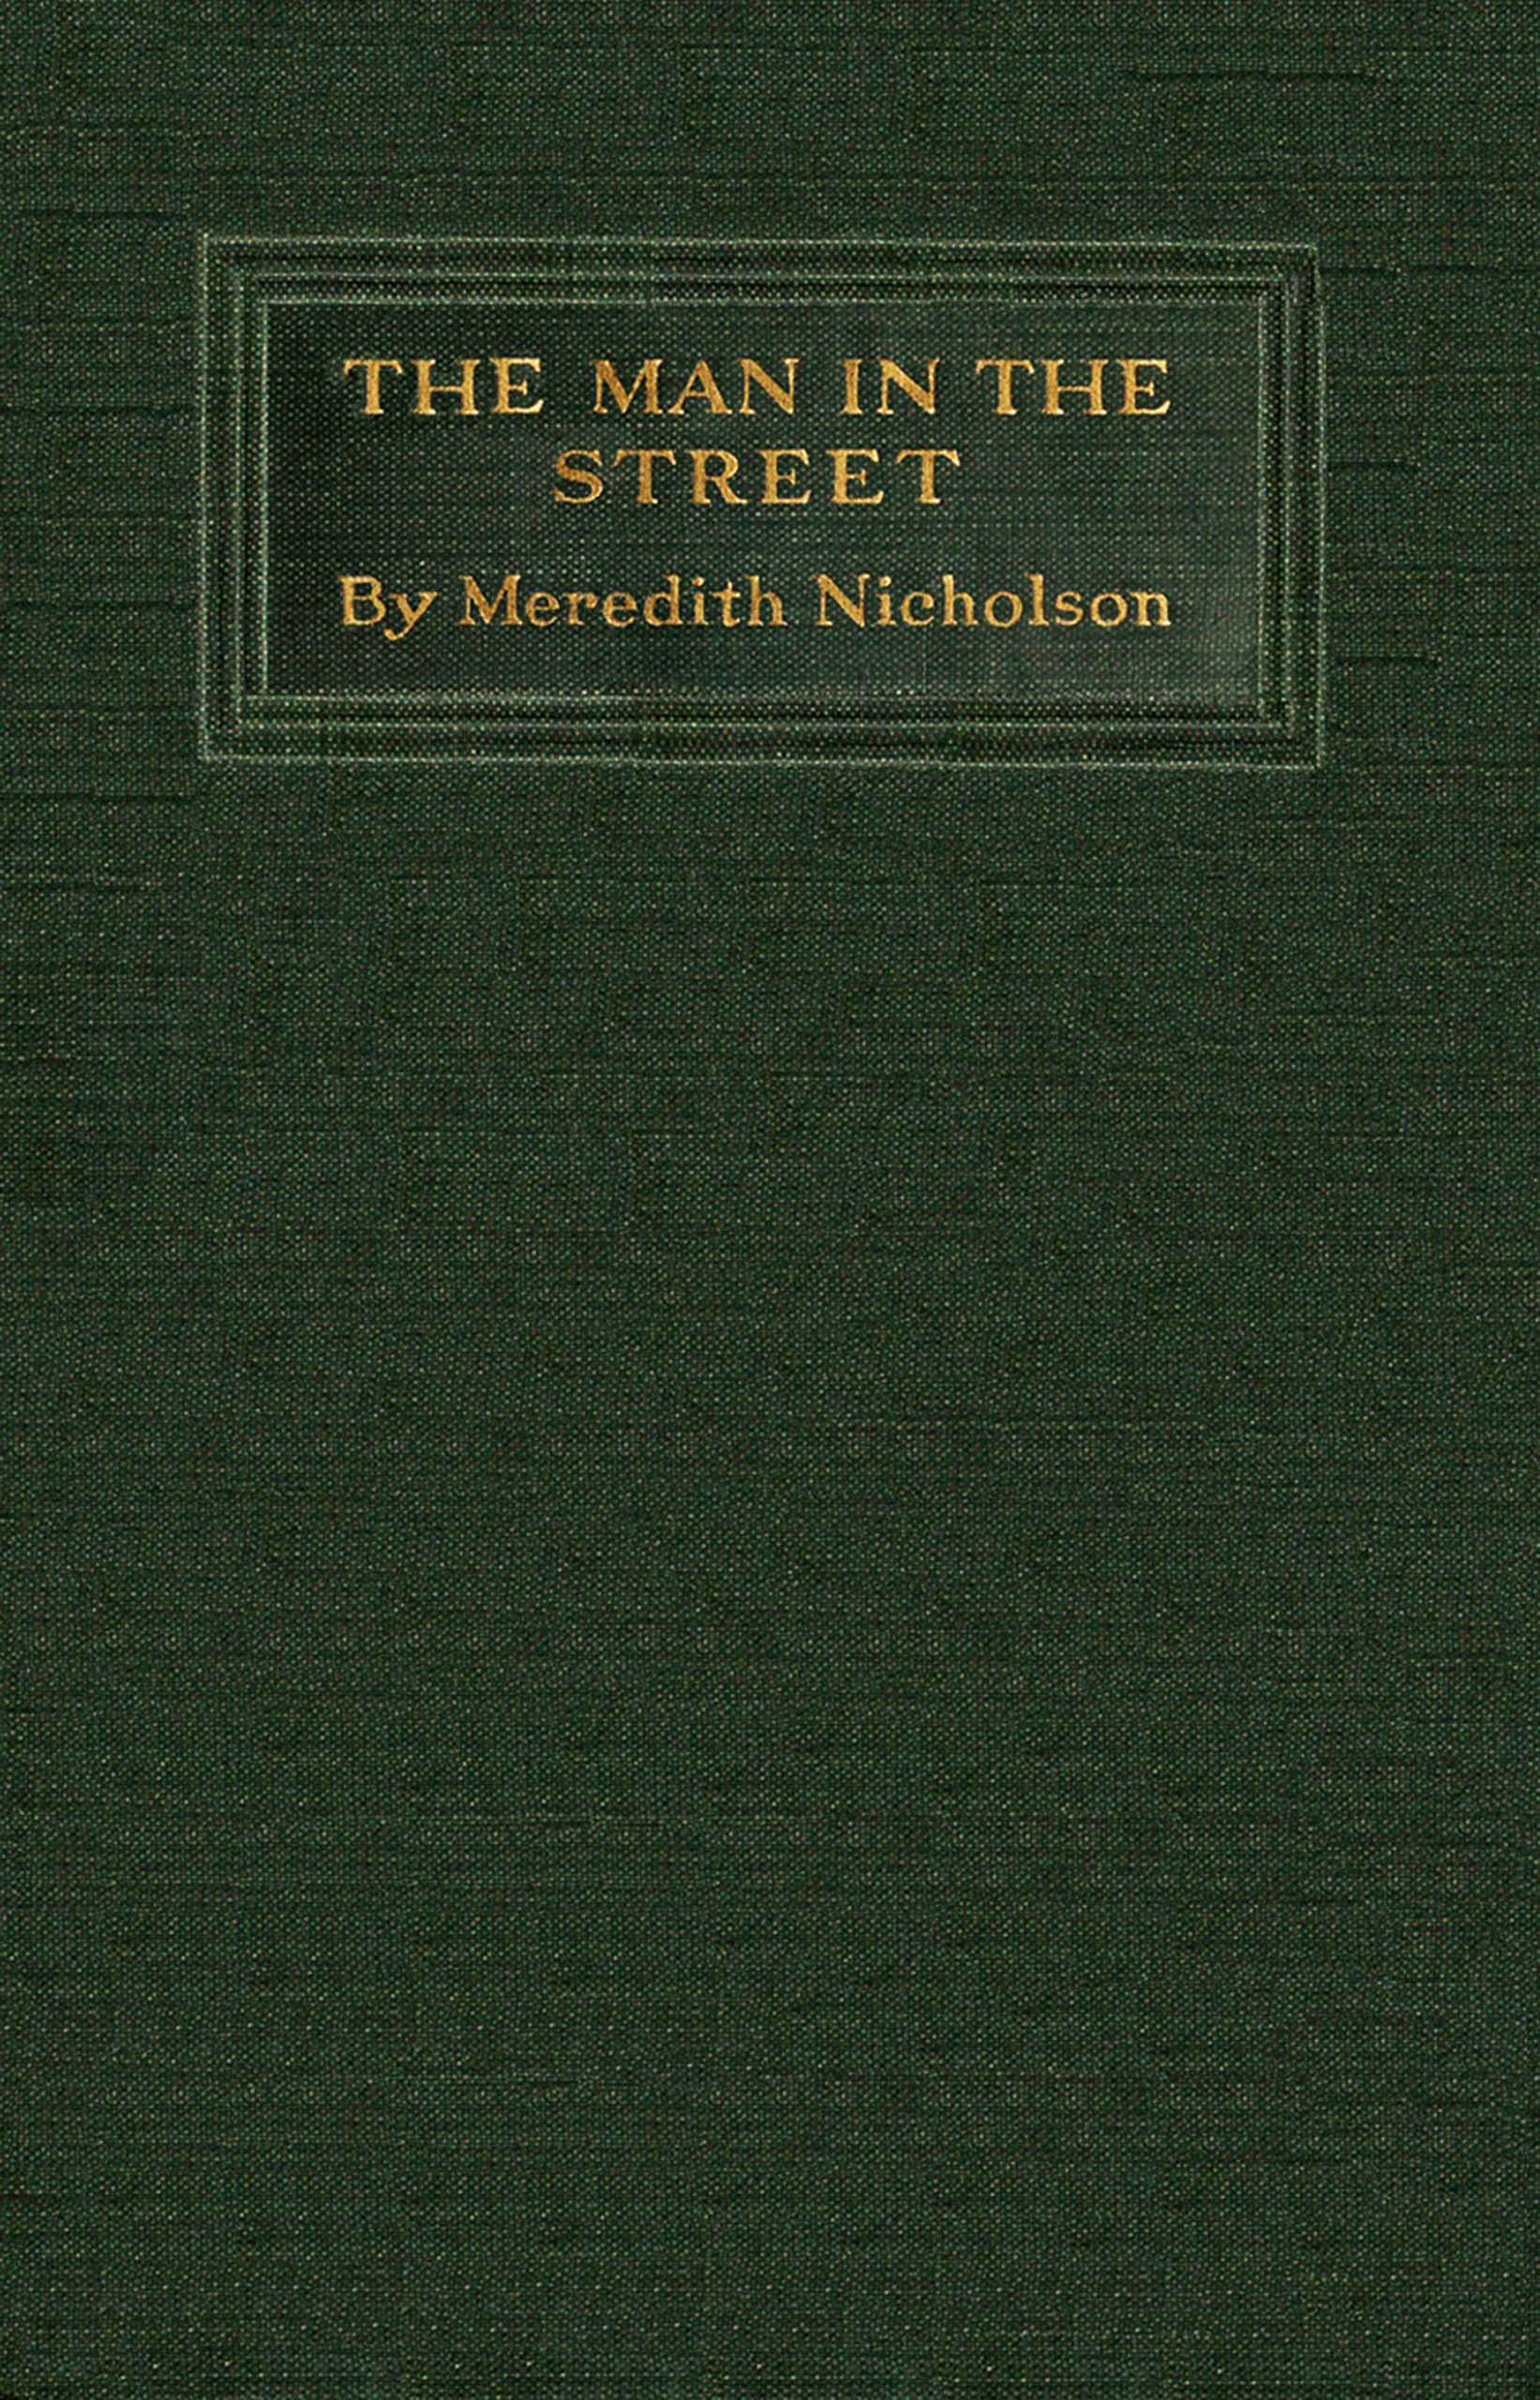 The man in the street, by Meredith Nicholson—A Project Gutenberg eBook